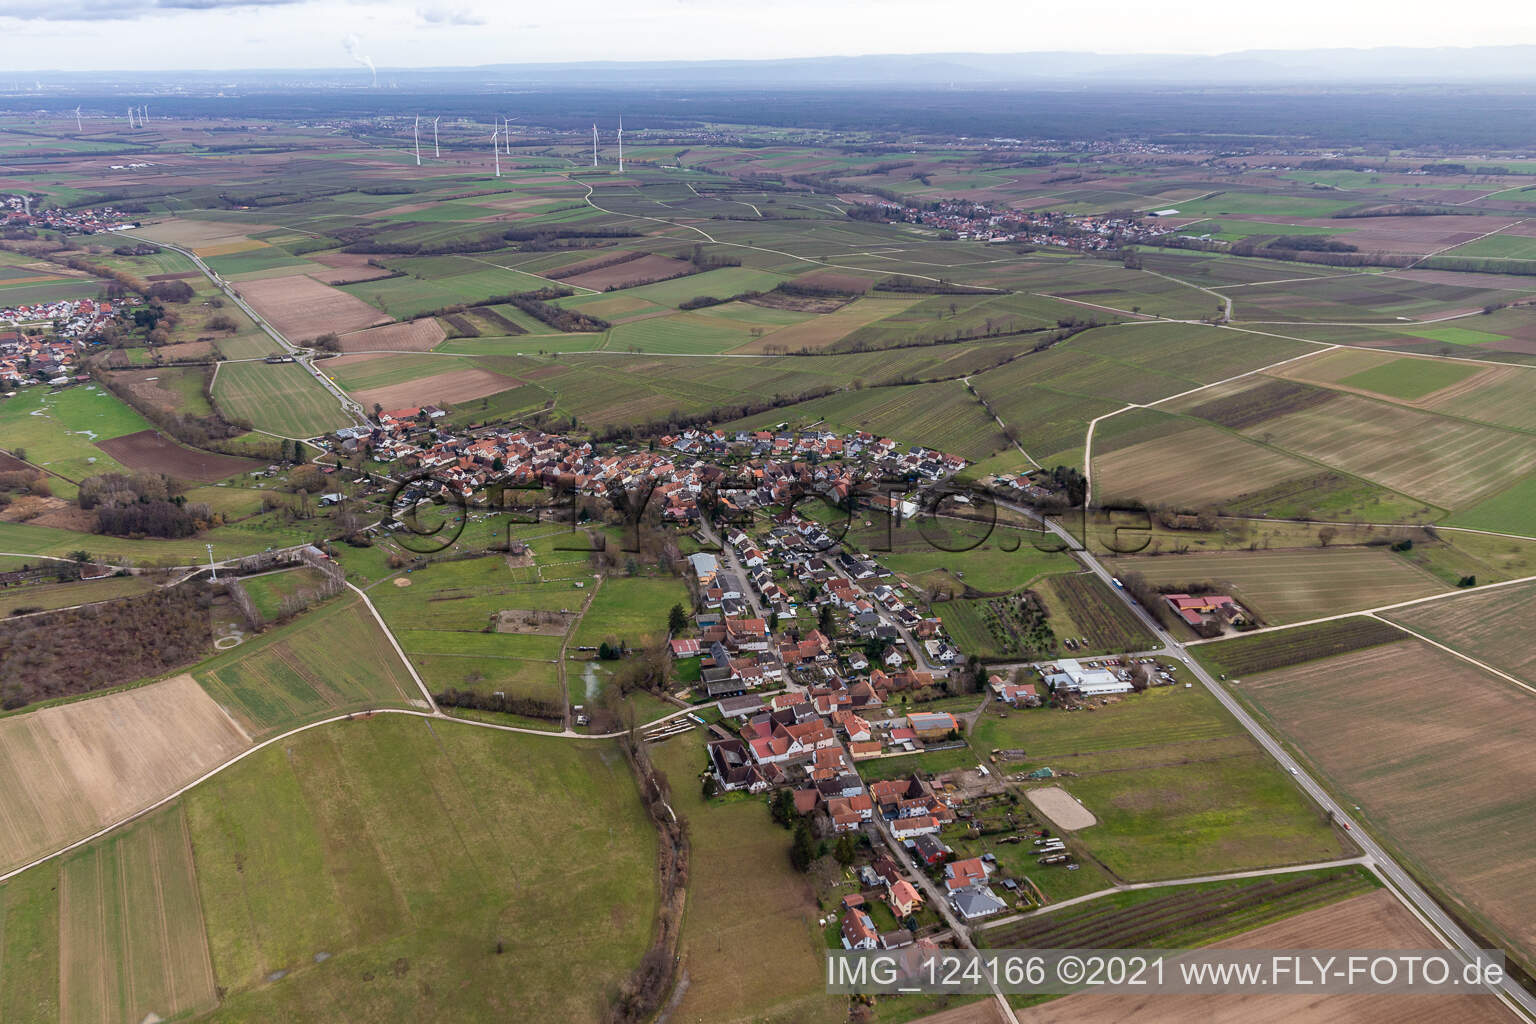 Oberhausen in the state Rhineland-Palatinate, Germany from the drone perspective